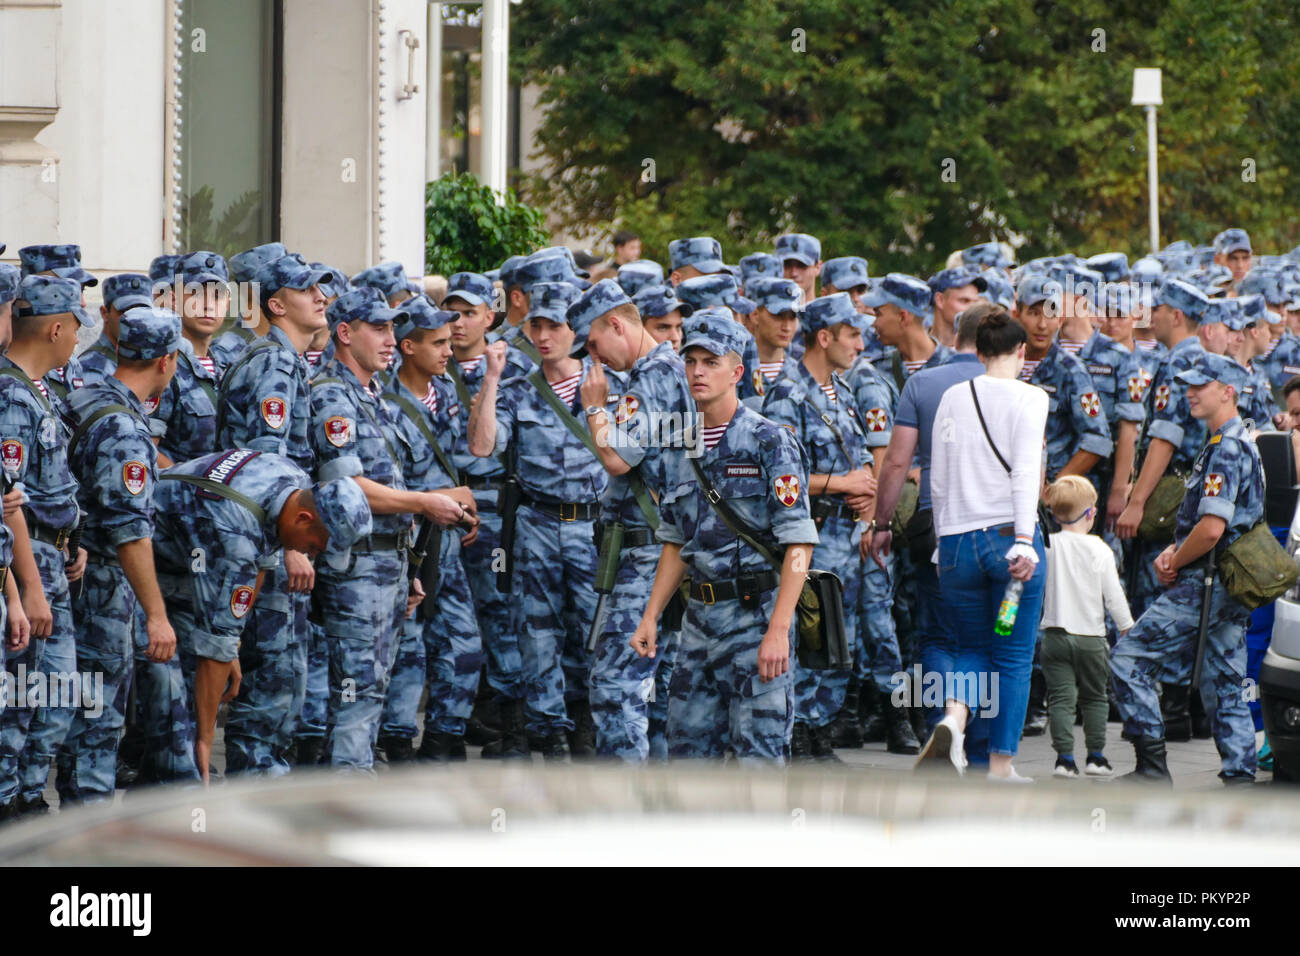 rosgardia troops on the streets of Moscow Stock Photo